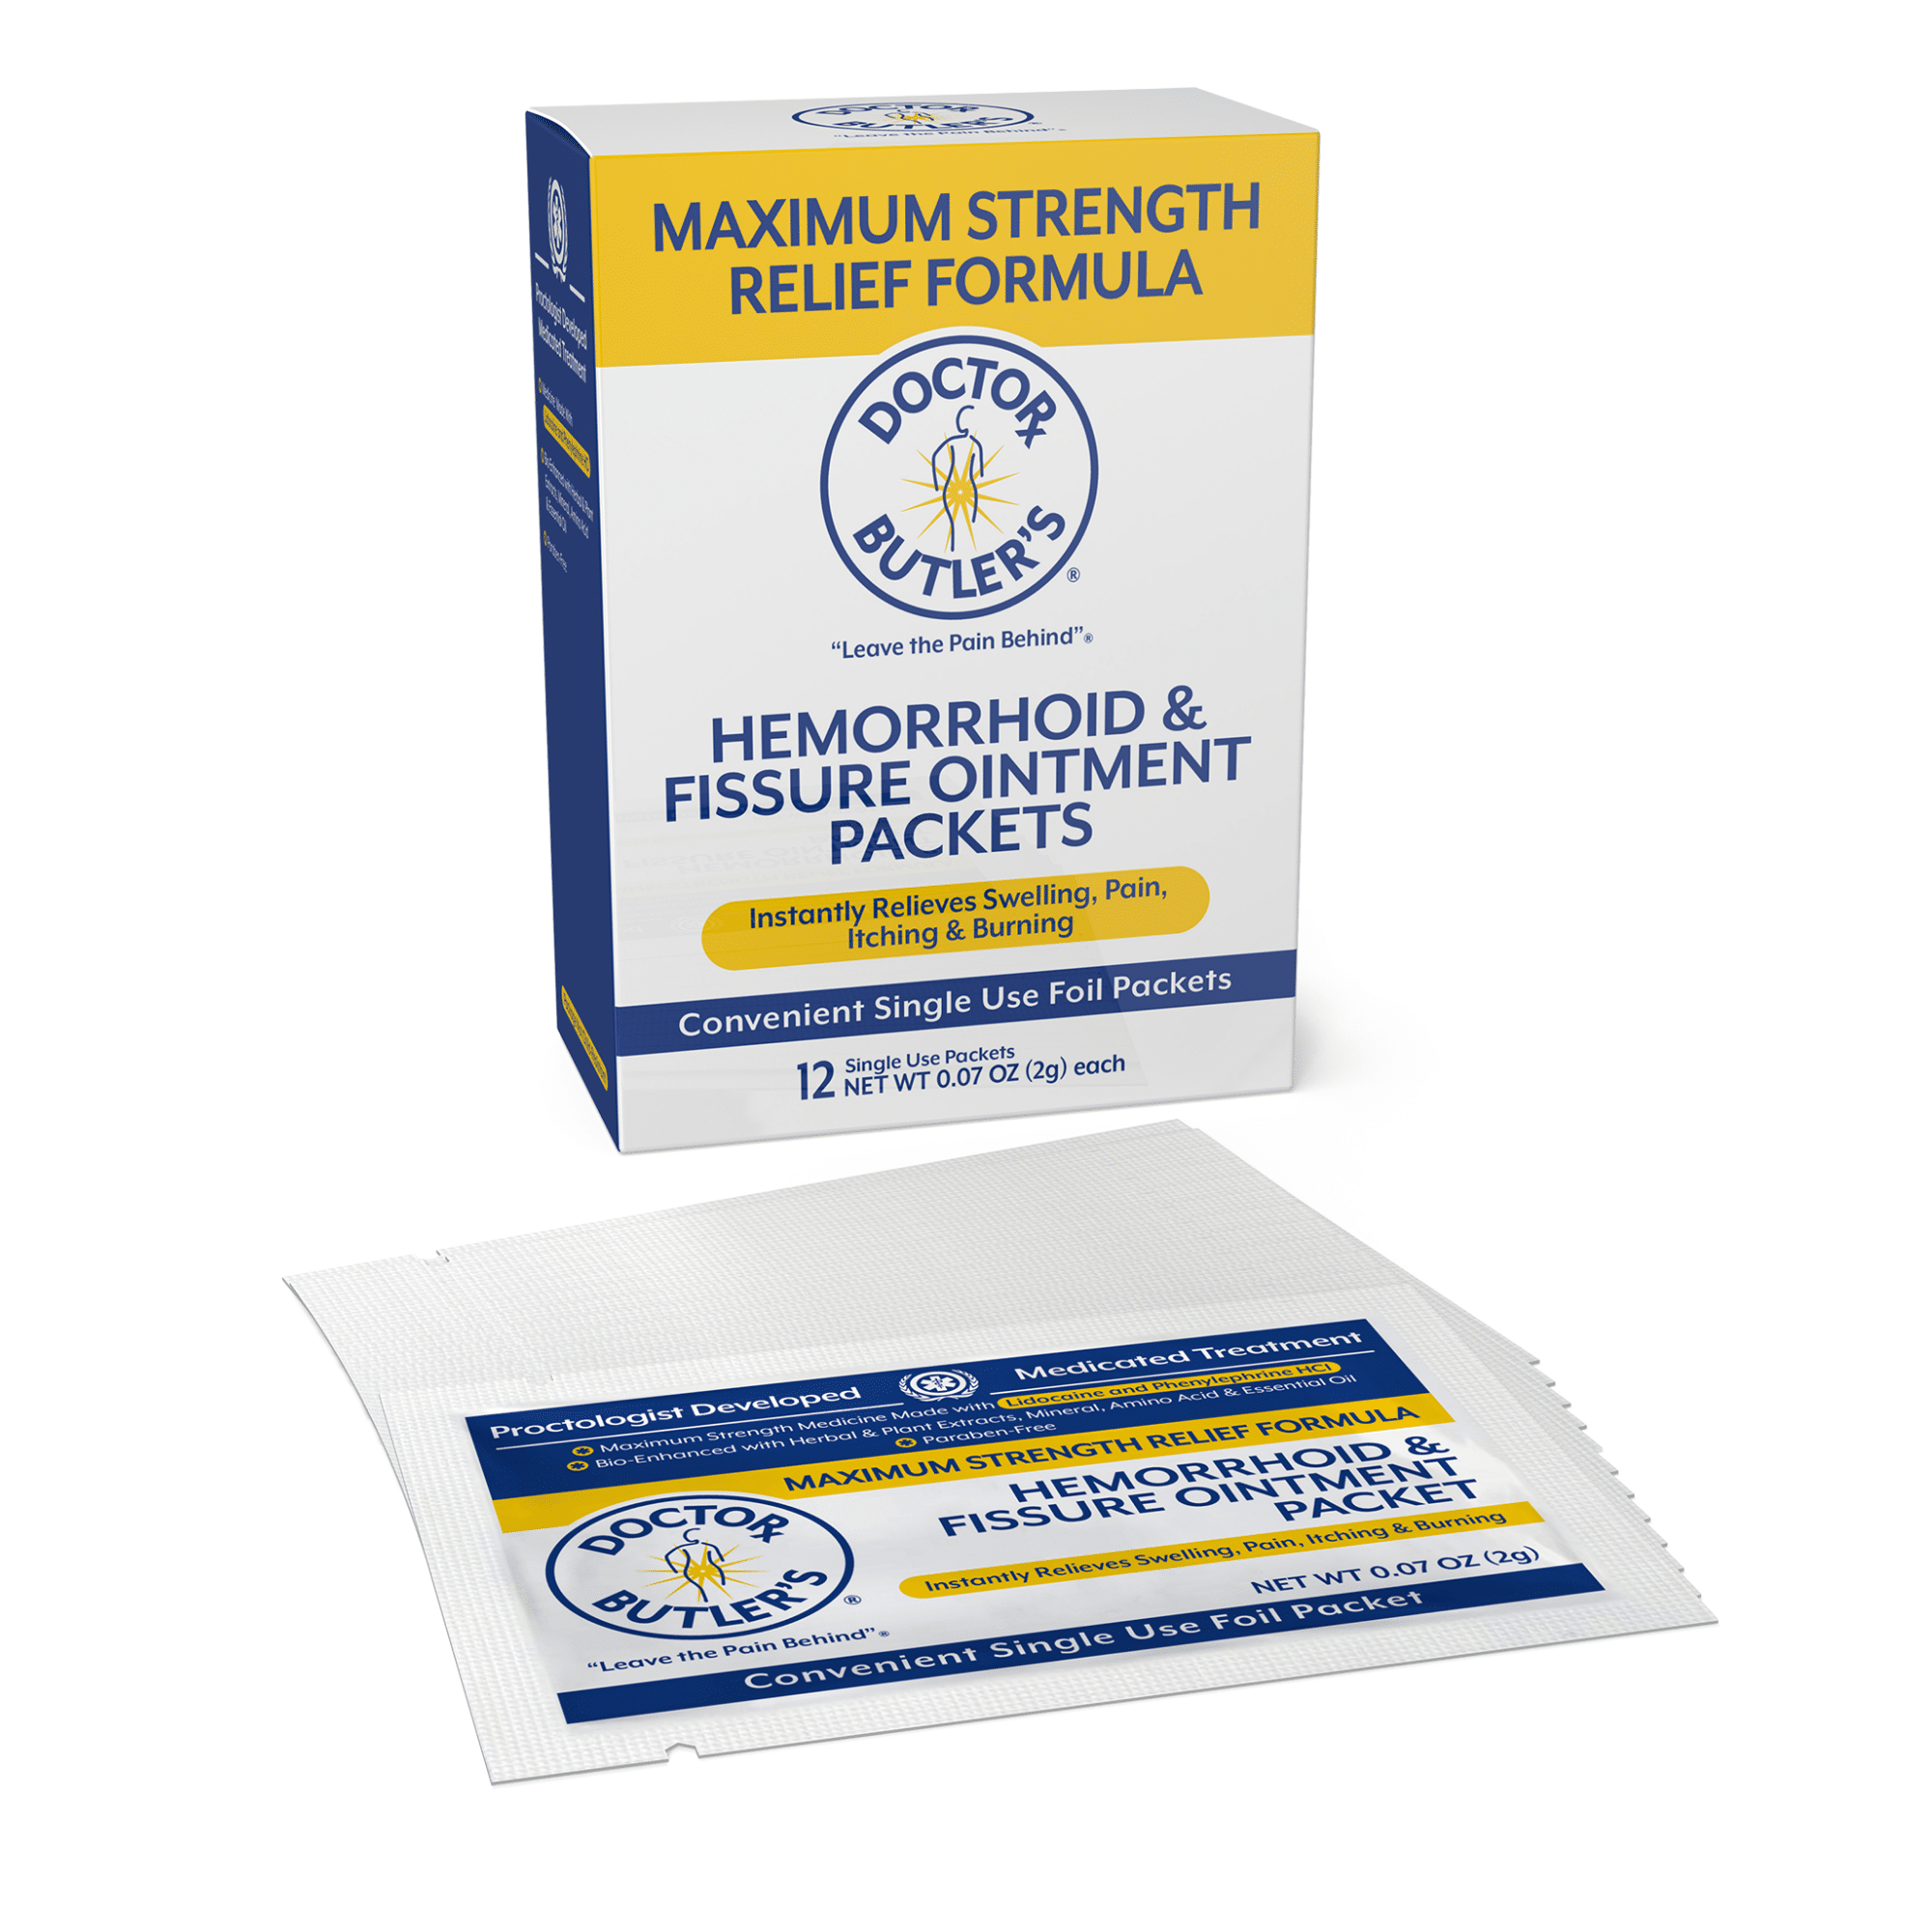 Doctor Butler's Maximum Strength Packets: Hemorrhoid and Fissure Ointment